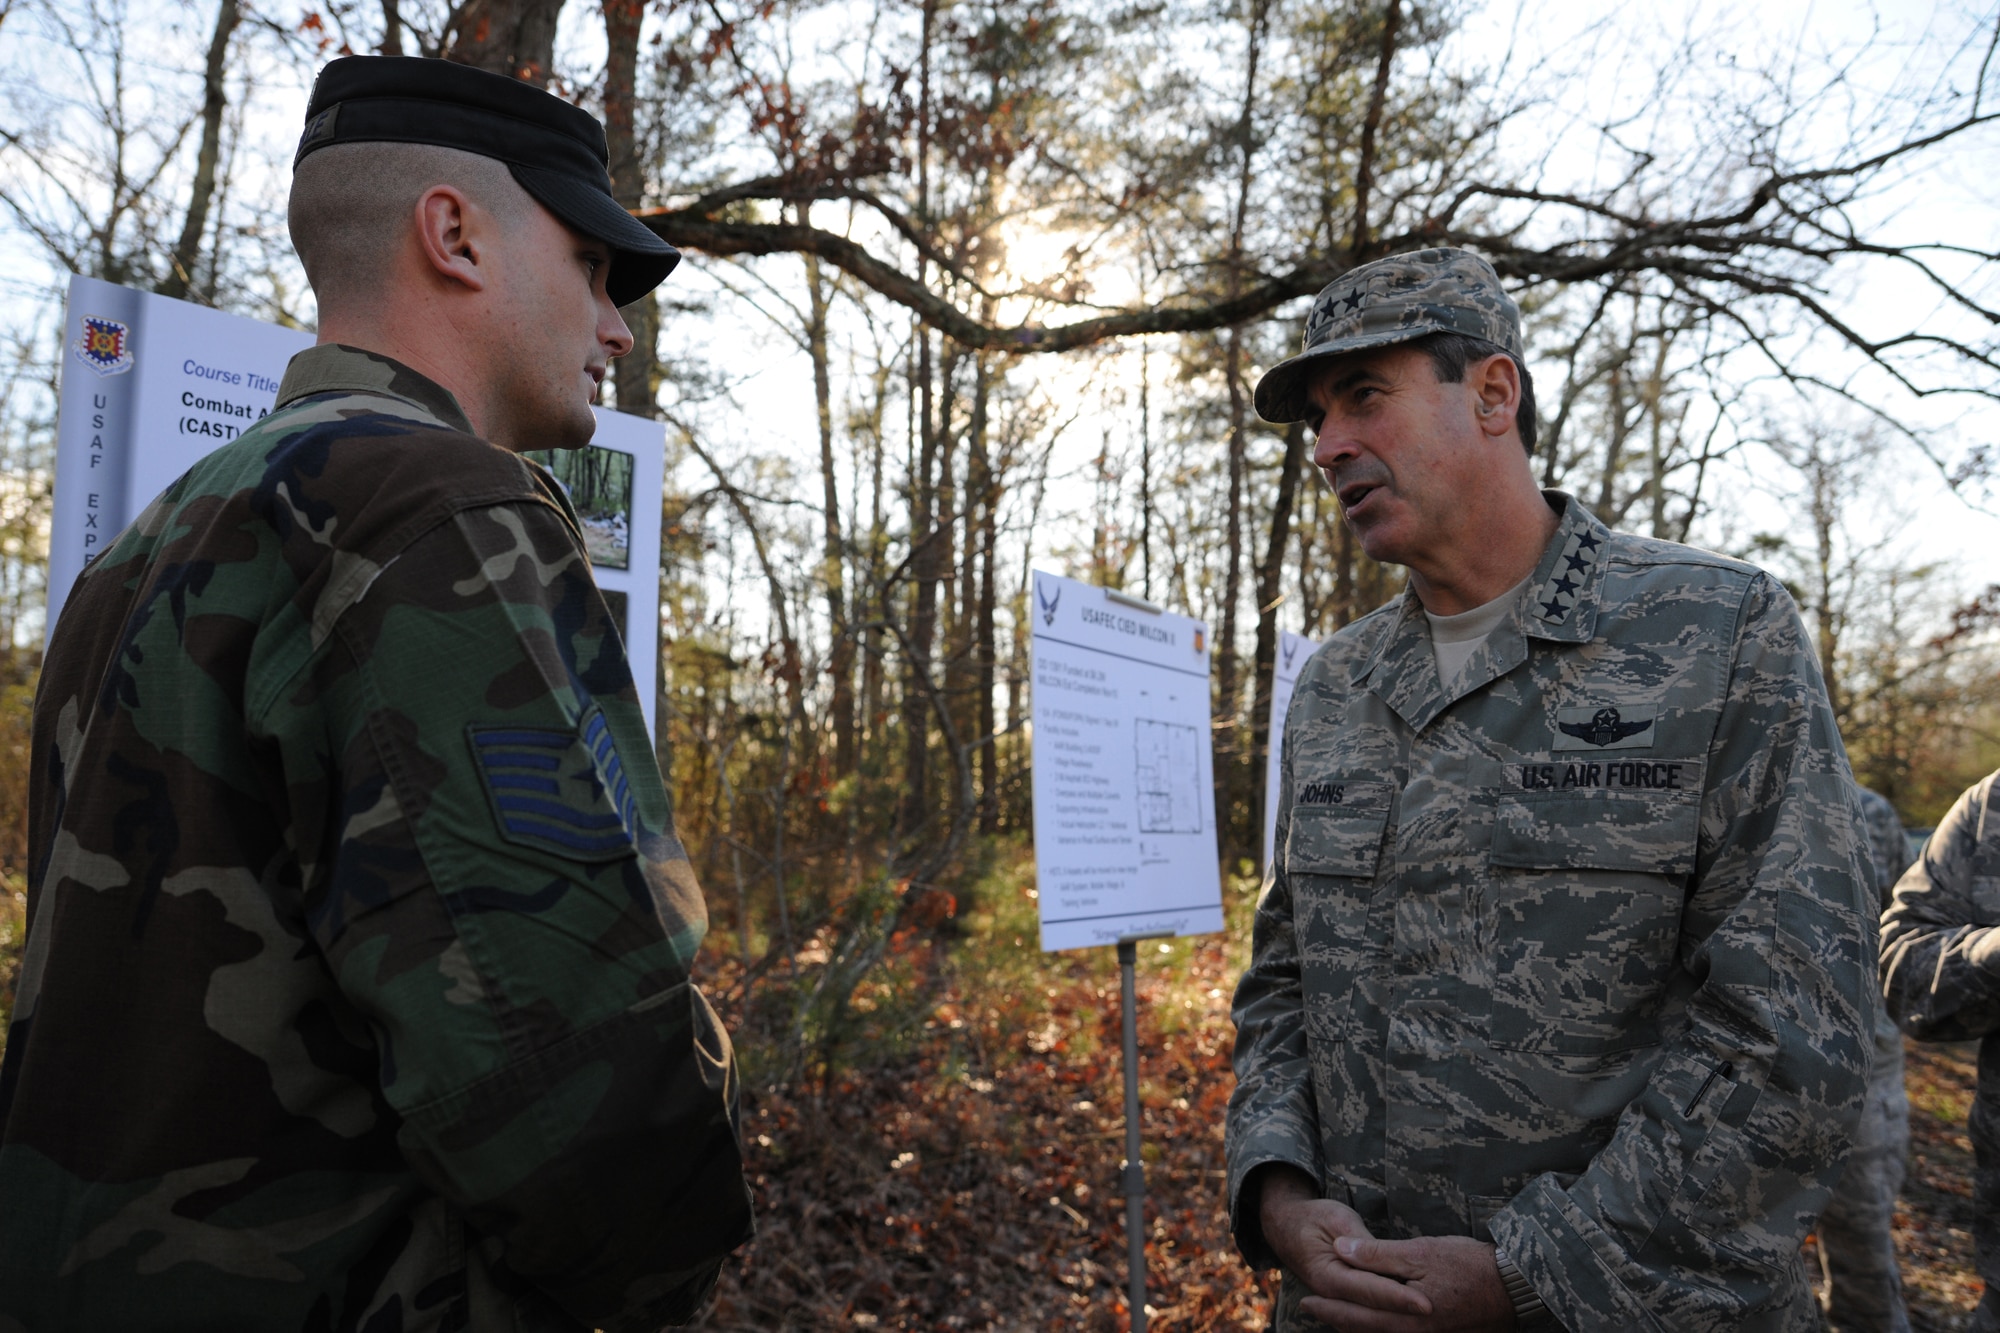 Tech. Sgt. Jonathan Tourville, 421st Combat Training Squadron instructor, gives an overview of the Combat Airman Skills Training Course to Gen. Raymond Johns Jr., Air Mobility Command commander, on a Fort Dix range during a visit December 3 to the U.S. Air Force Expeditionary Center on Joint Base McGuire-Dix-Lakehurst.  (U.S. Air Force Photo/Staff Sgt. Nathan G. Bevier) 